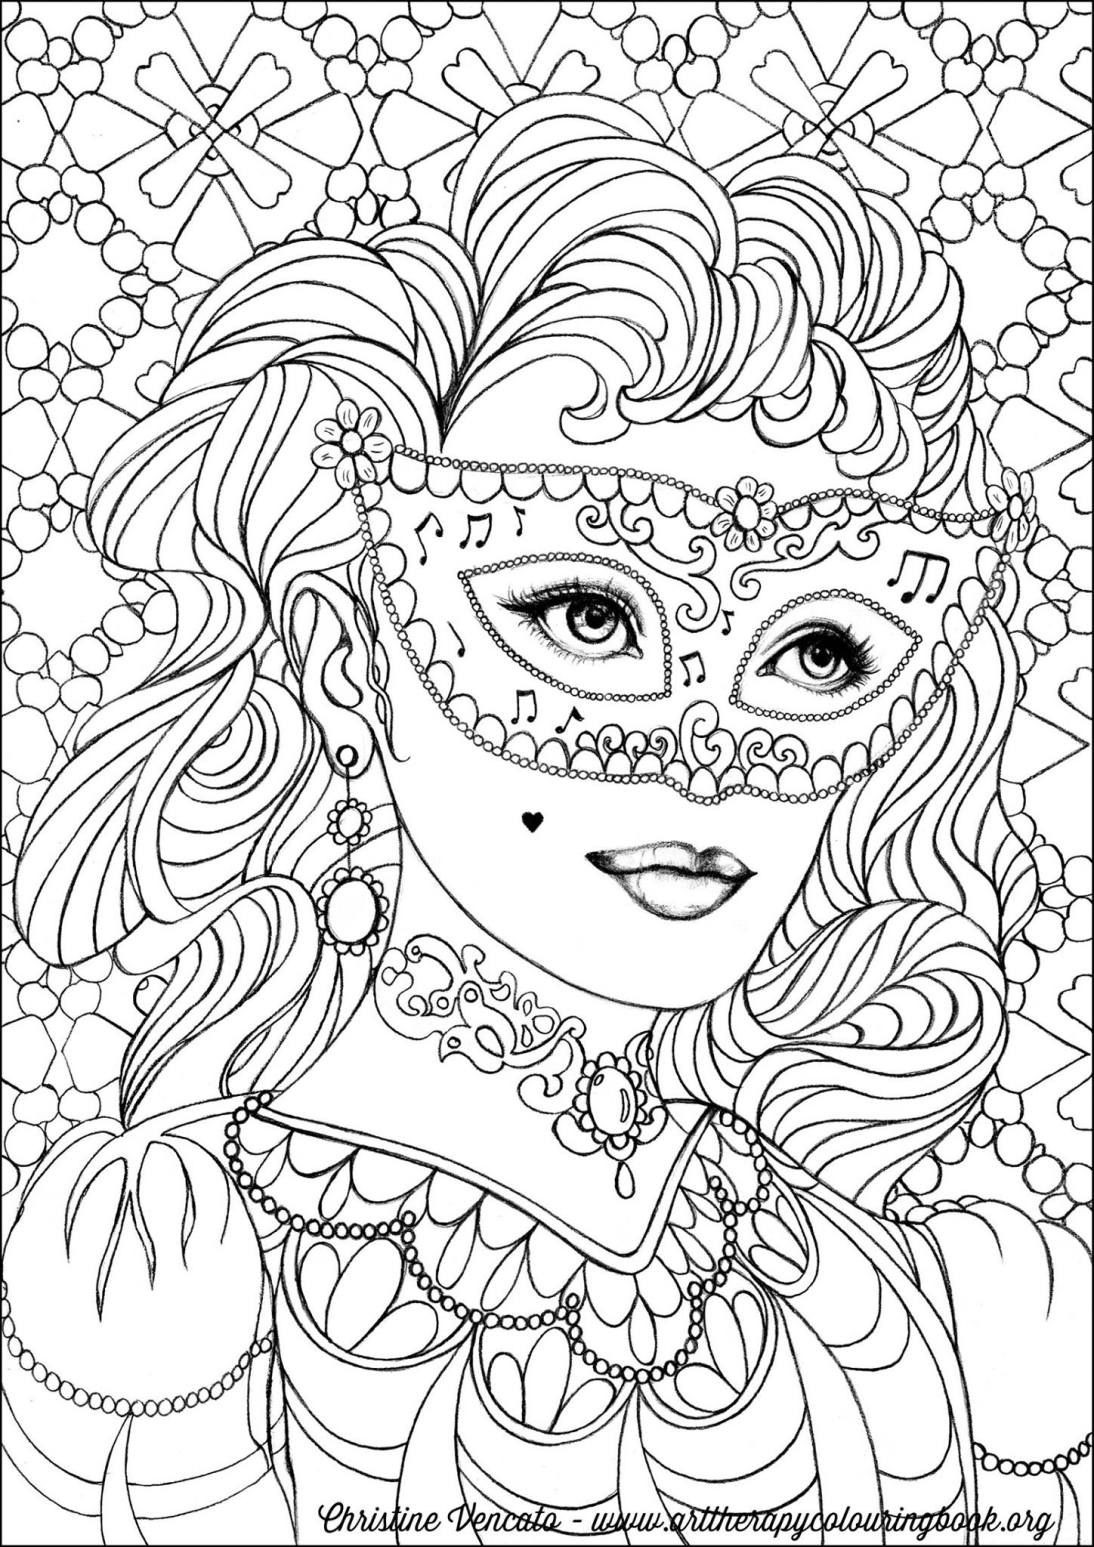 Online Adult Coloring Book
 Free Coloring Page From Adult Coloring Worldwide Art by